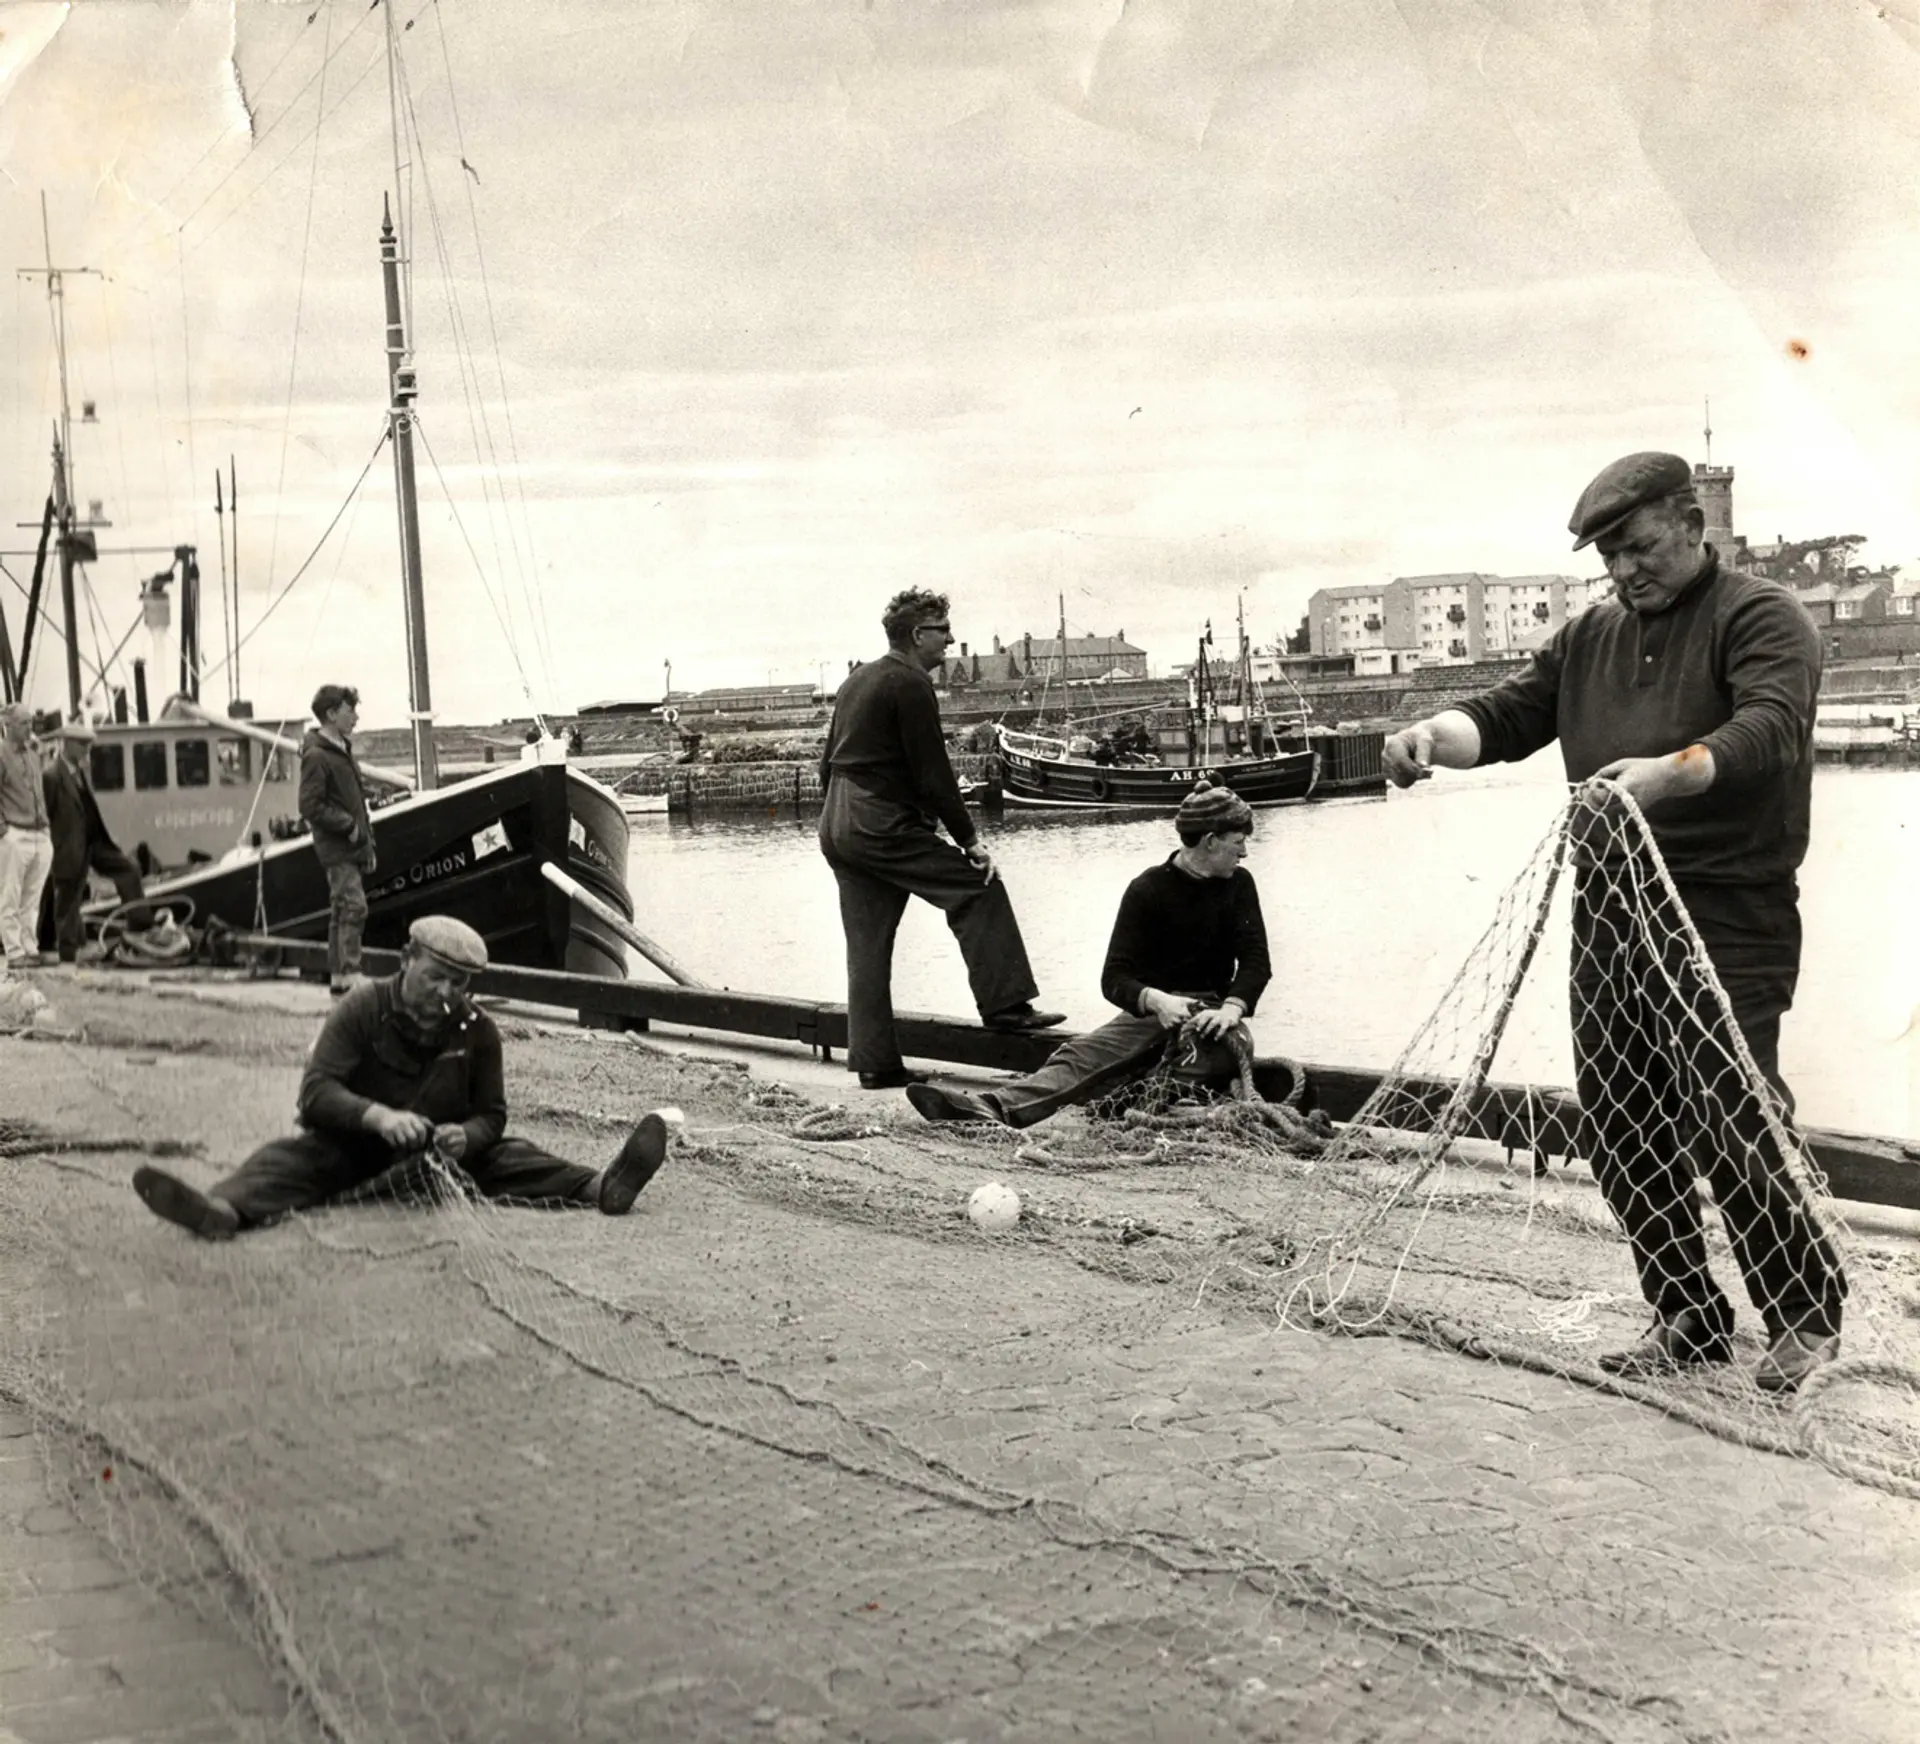 A sepia image from the past. Seven fishermen are standing and organising their nets in a harbour. They are of varying ages.